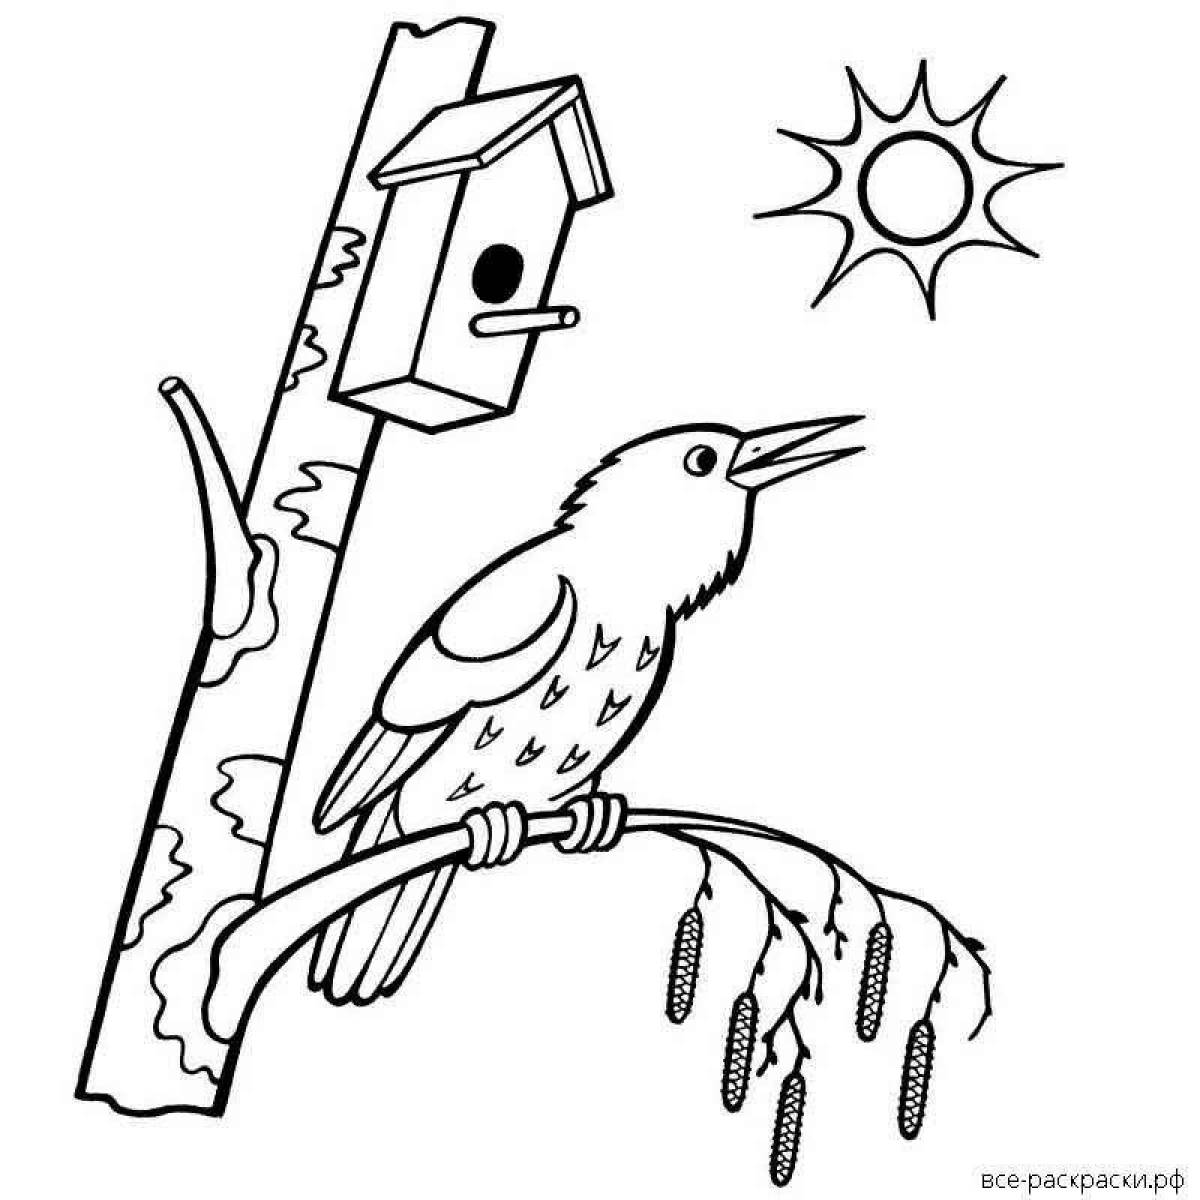 Amazing birdhouse coloring page